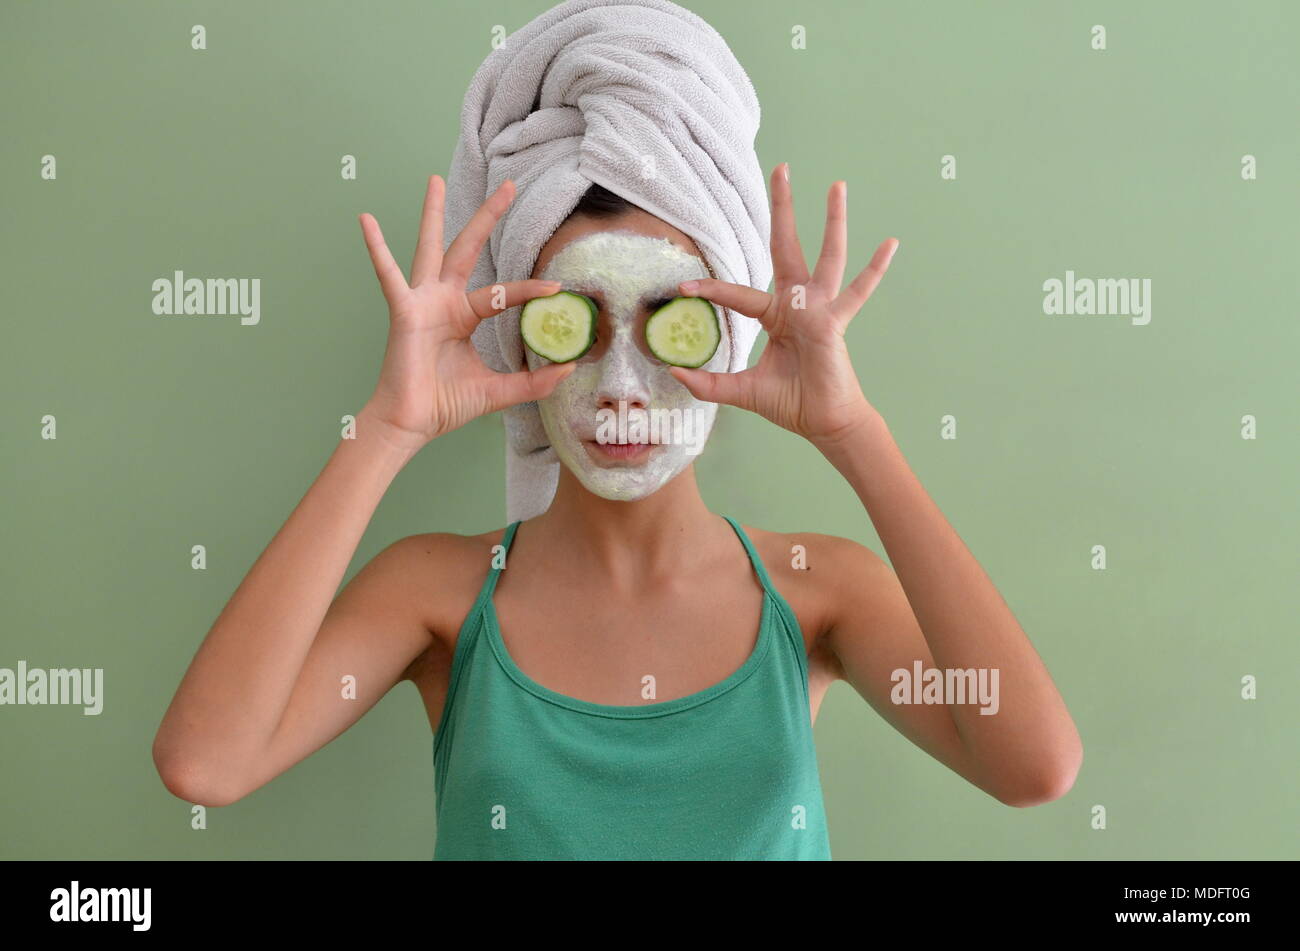 Teenage girl with a face mask on holding cucumber slices in front of her eyes Stock Photo